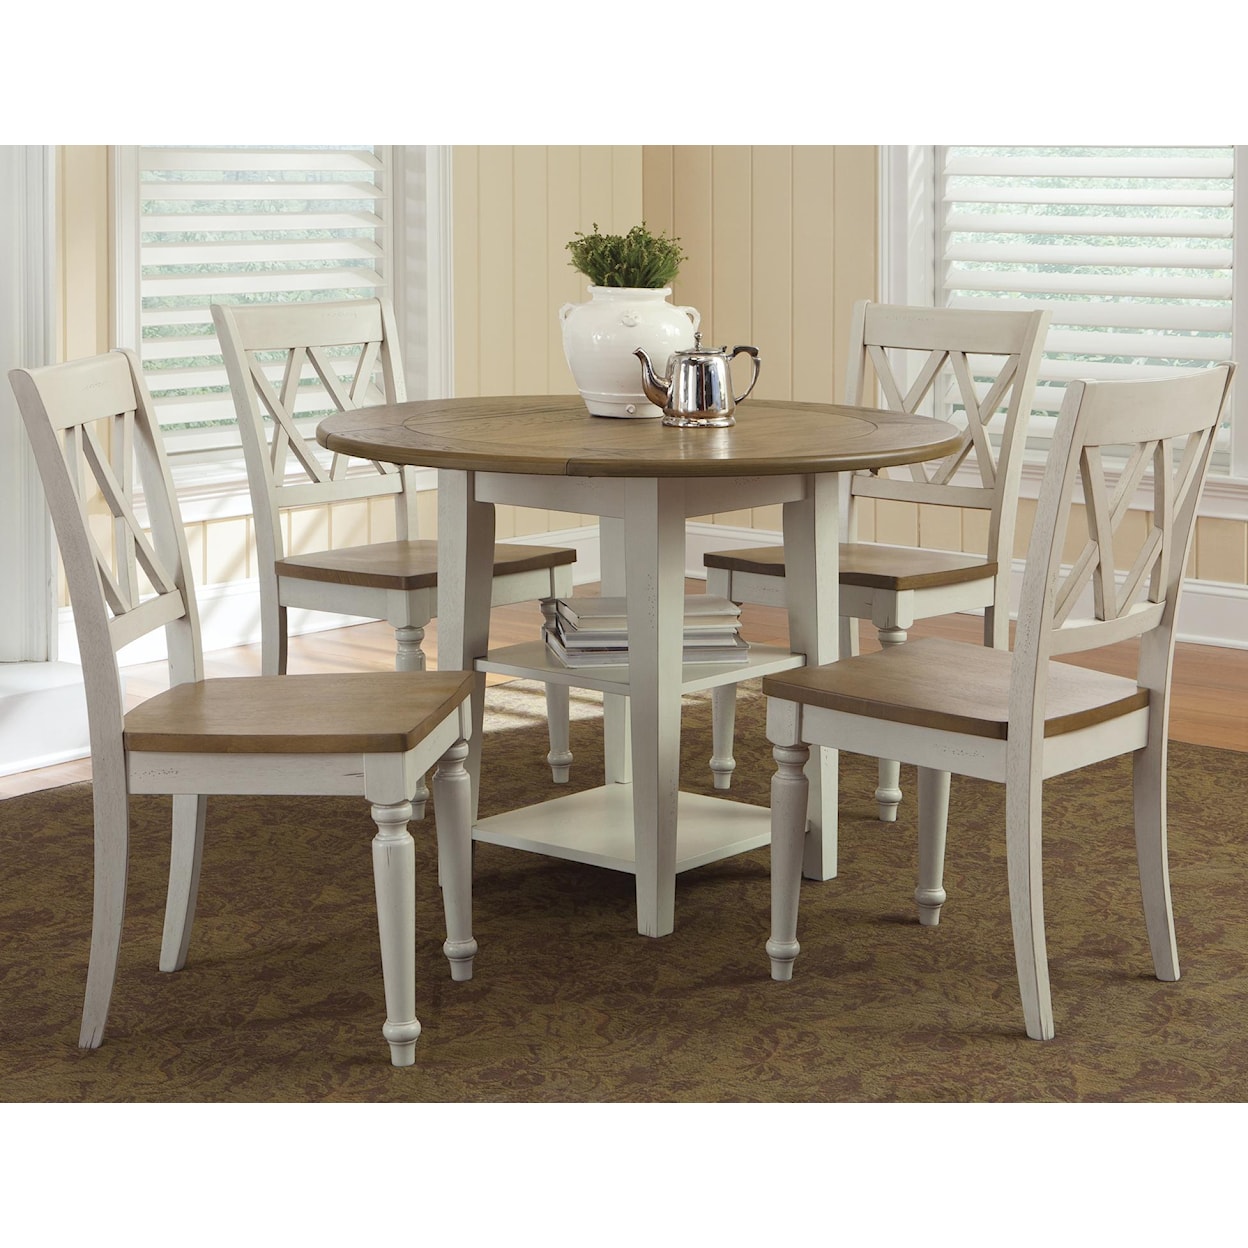 Liberty Furniture Al Fresco 5 Piece Drop Leaf Table and Chairs Set